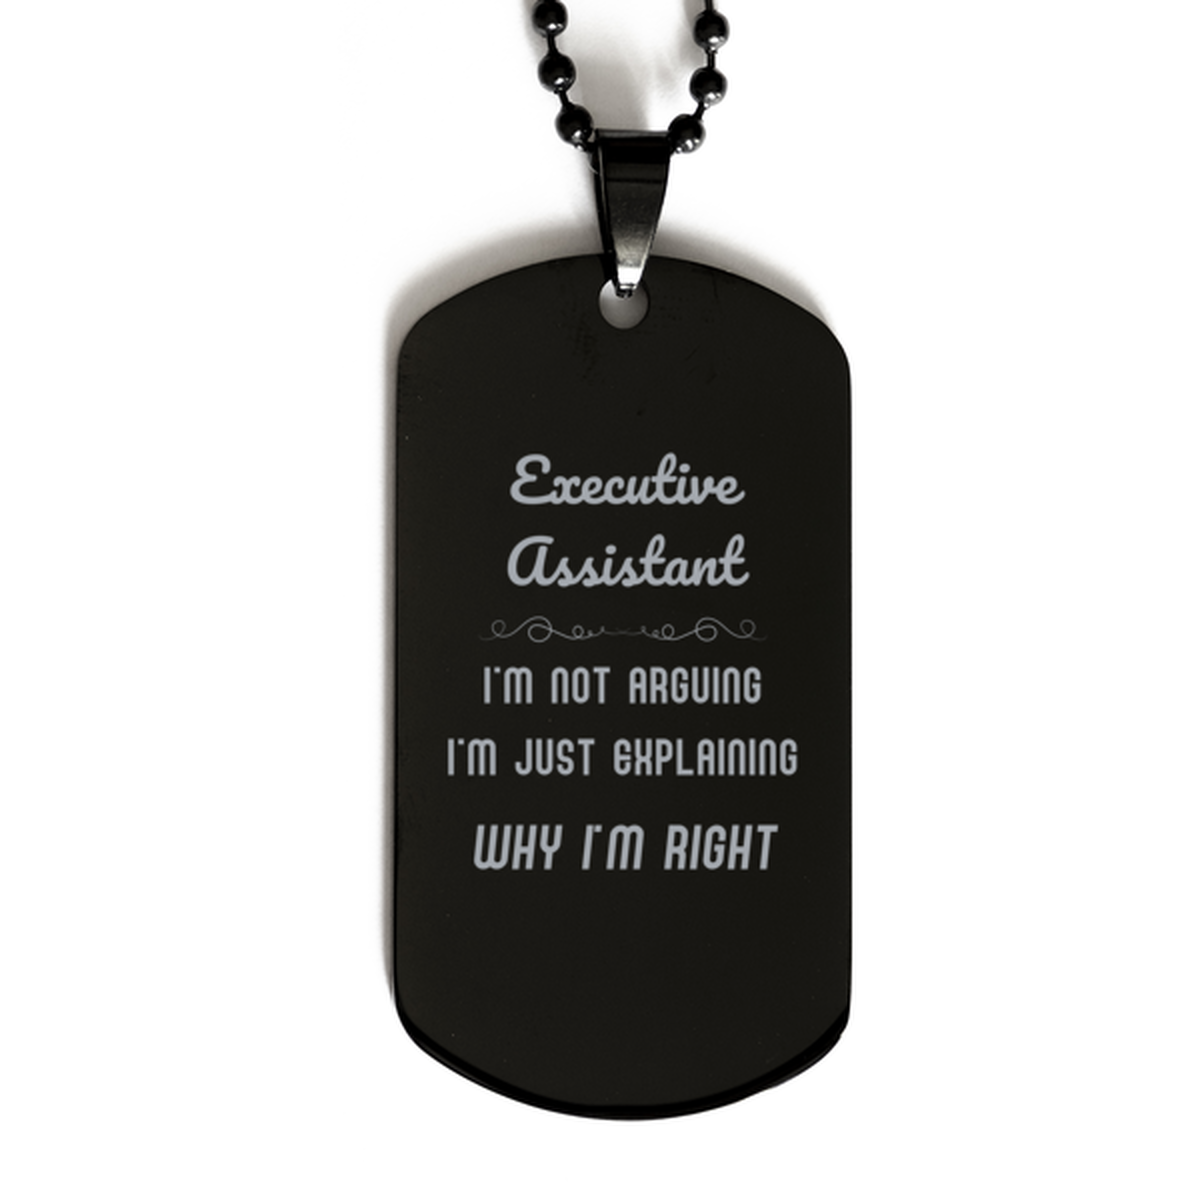 Executive Assistant I'm not Arguing. I'm Just Explaining Why I'm RIGHT Black Dog Tag, Funny Saying Quote Executive Assistant Gifts For Executive Assistant Graduation Birthday Christmas Gifts for Men Women Coworker